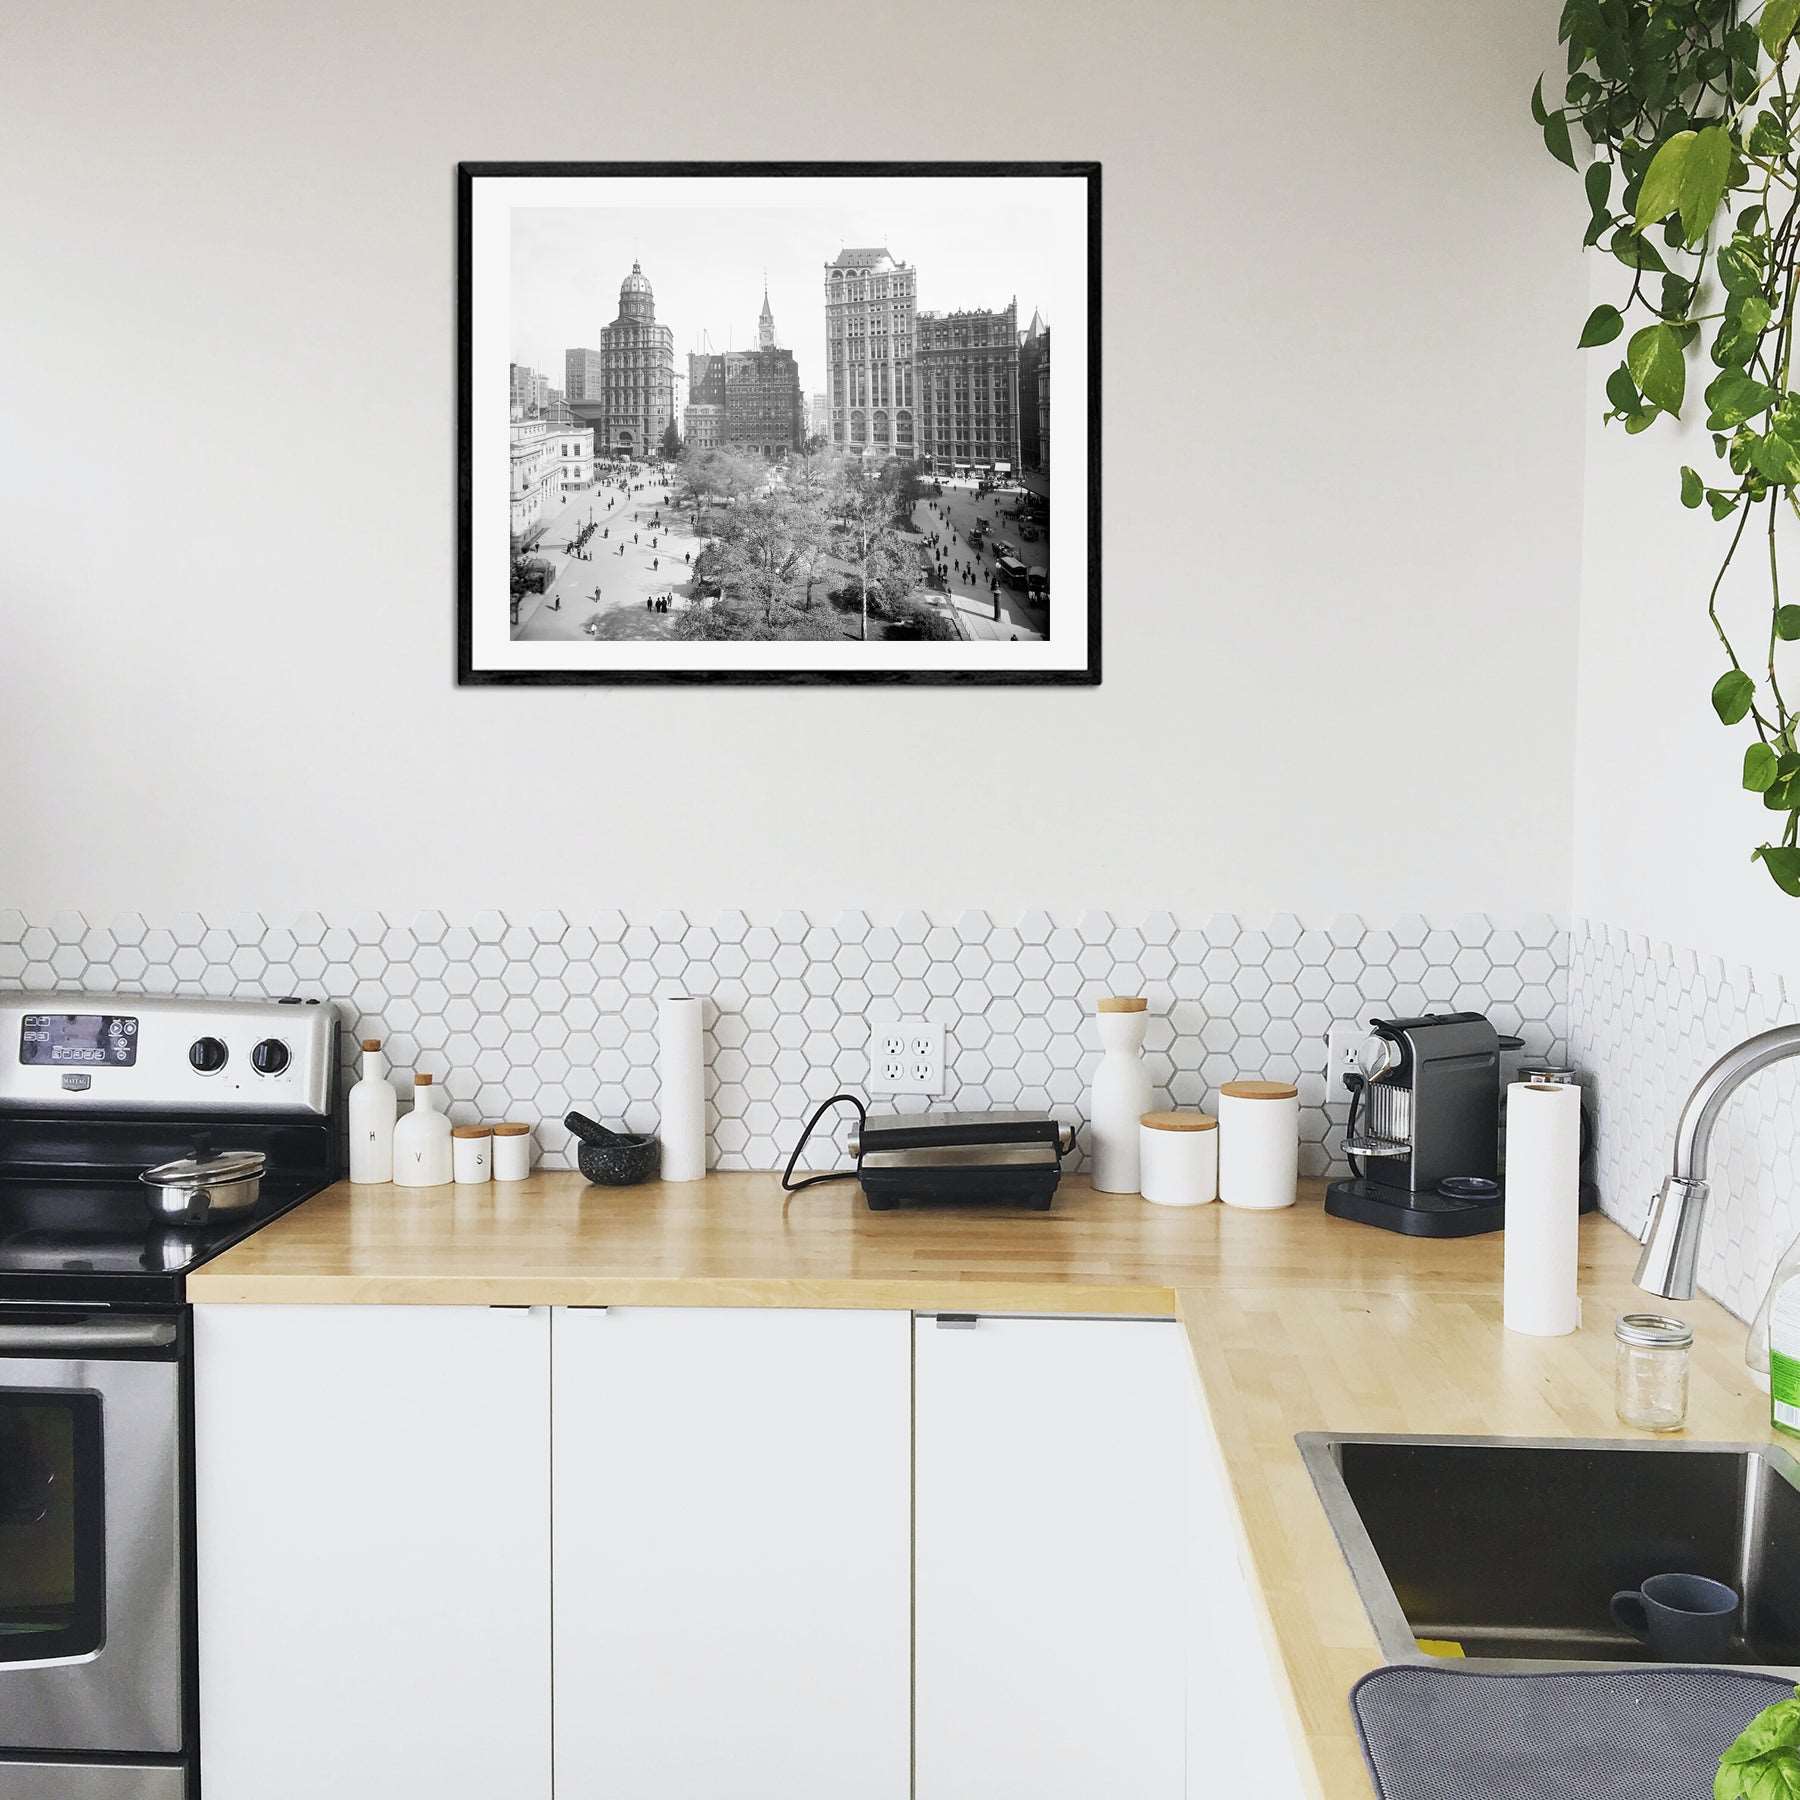 A framed paper print of a photograph of New York City hanging in a kitchen